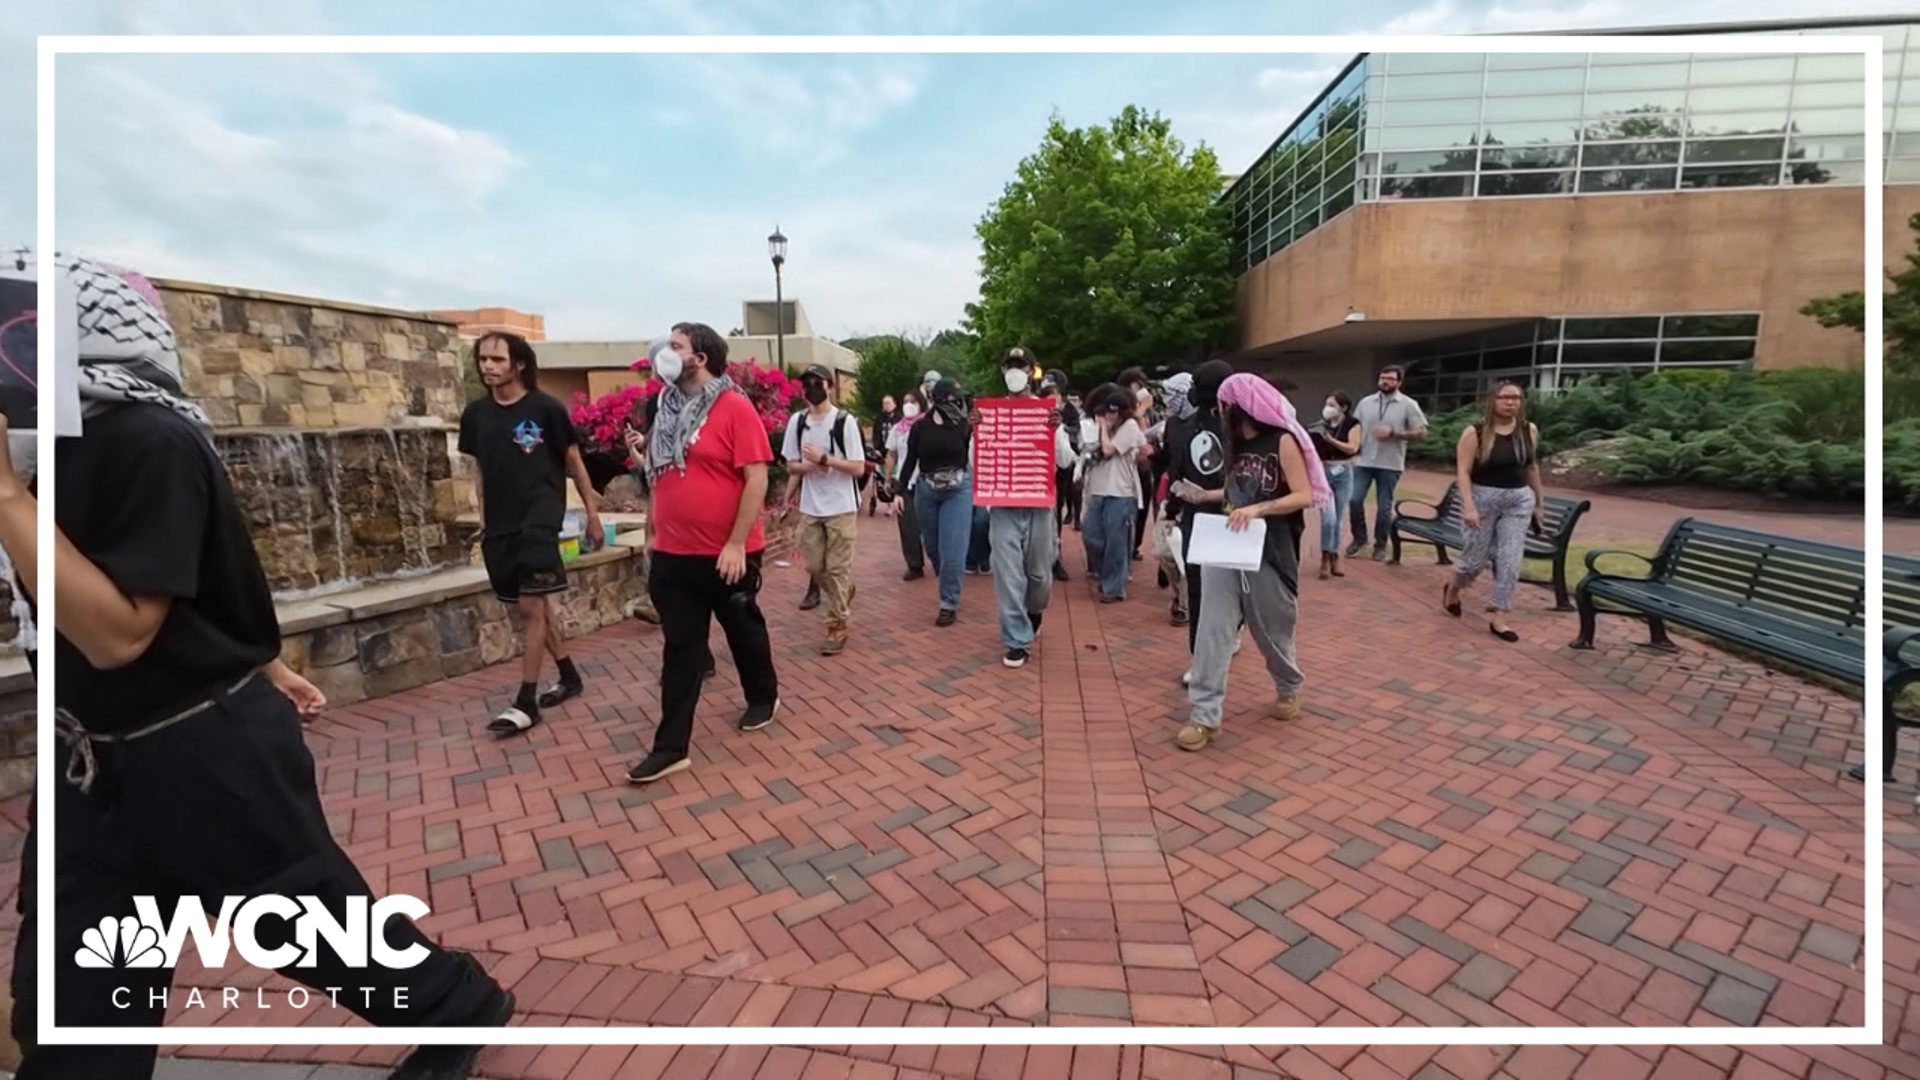 One person was arrested when a pro-Palestine encampment at UNC Charlotte was removed on Tuesday, university officials confirmed.